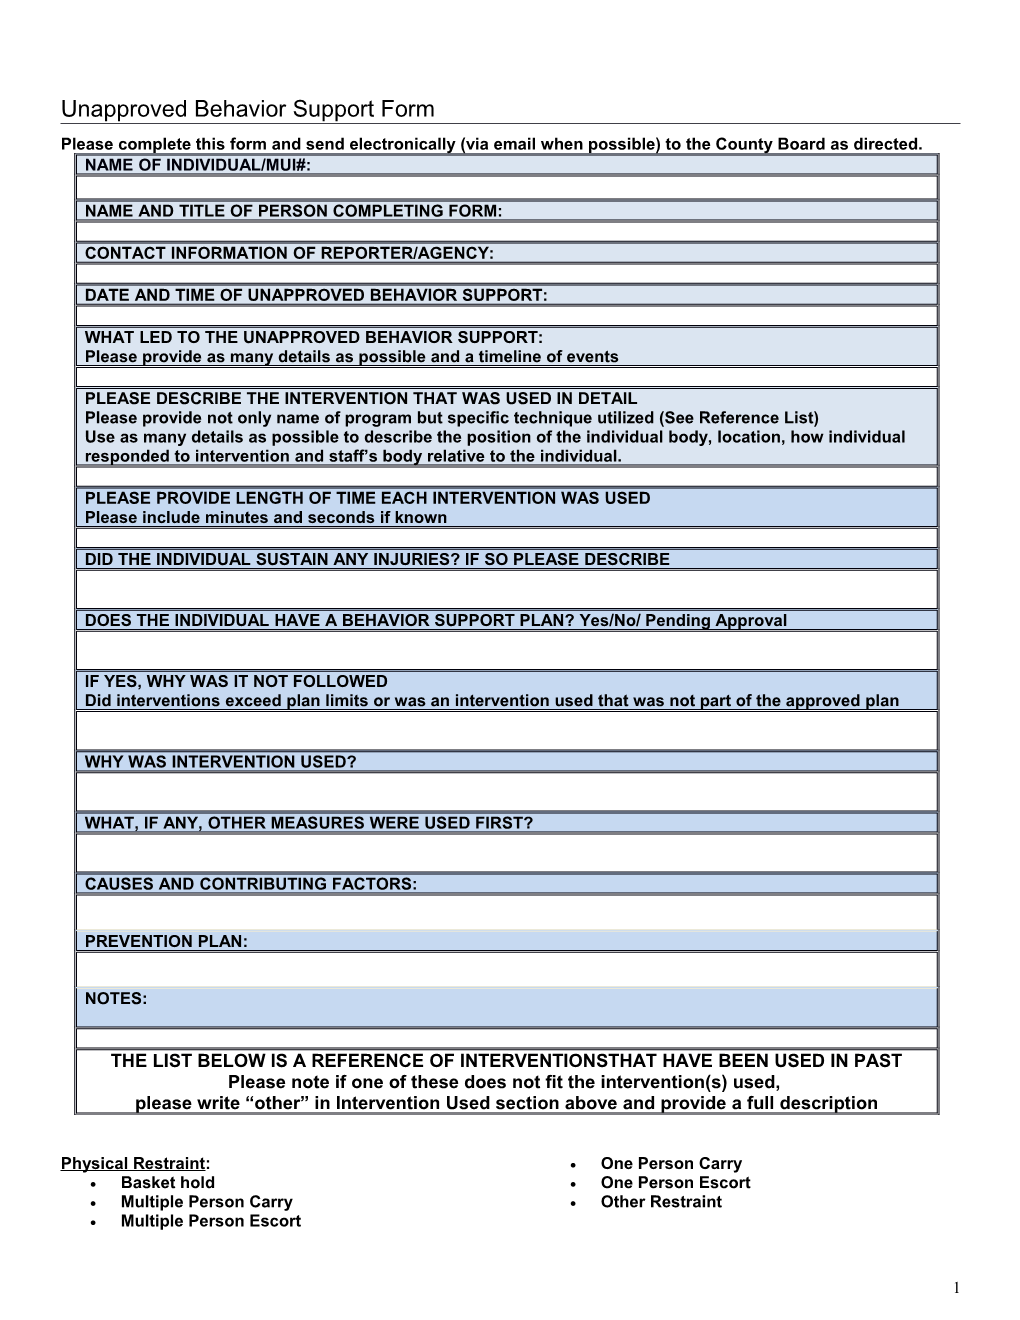 Unapproved Behavior Support Form